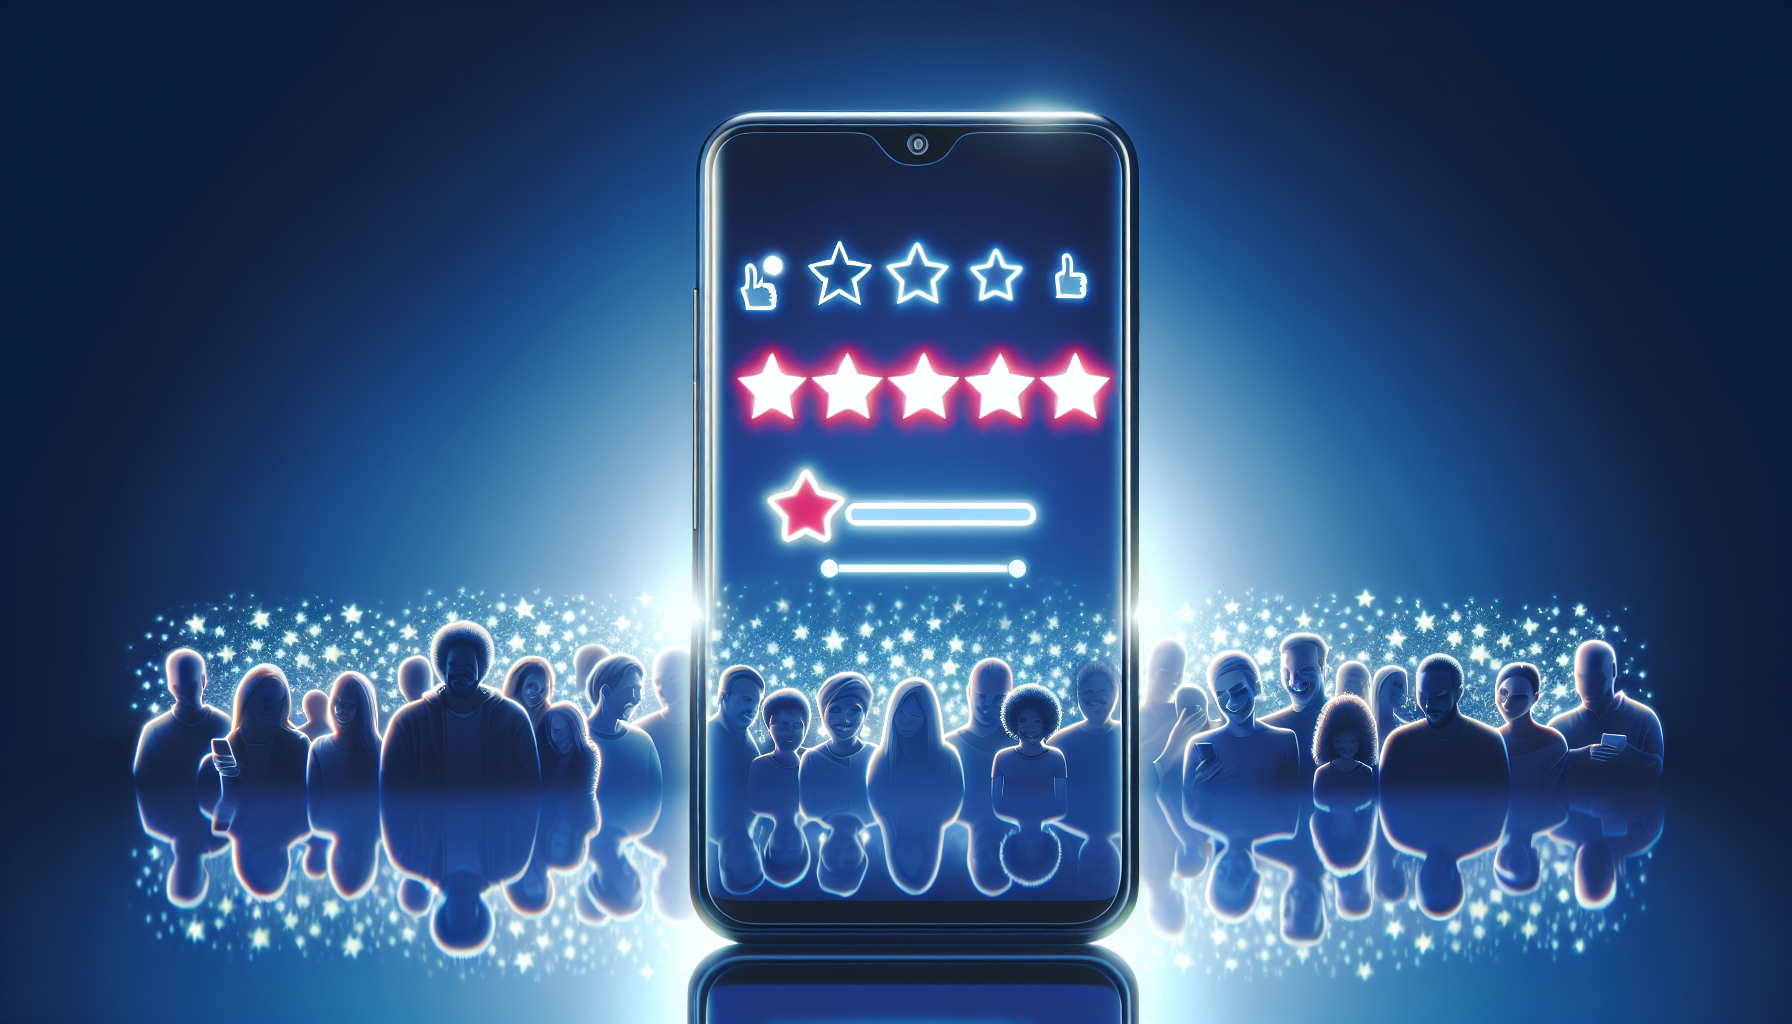 Google Reviews on a smartphone screen